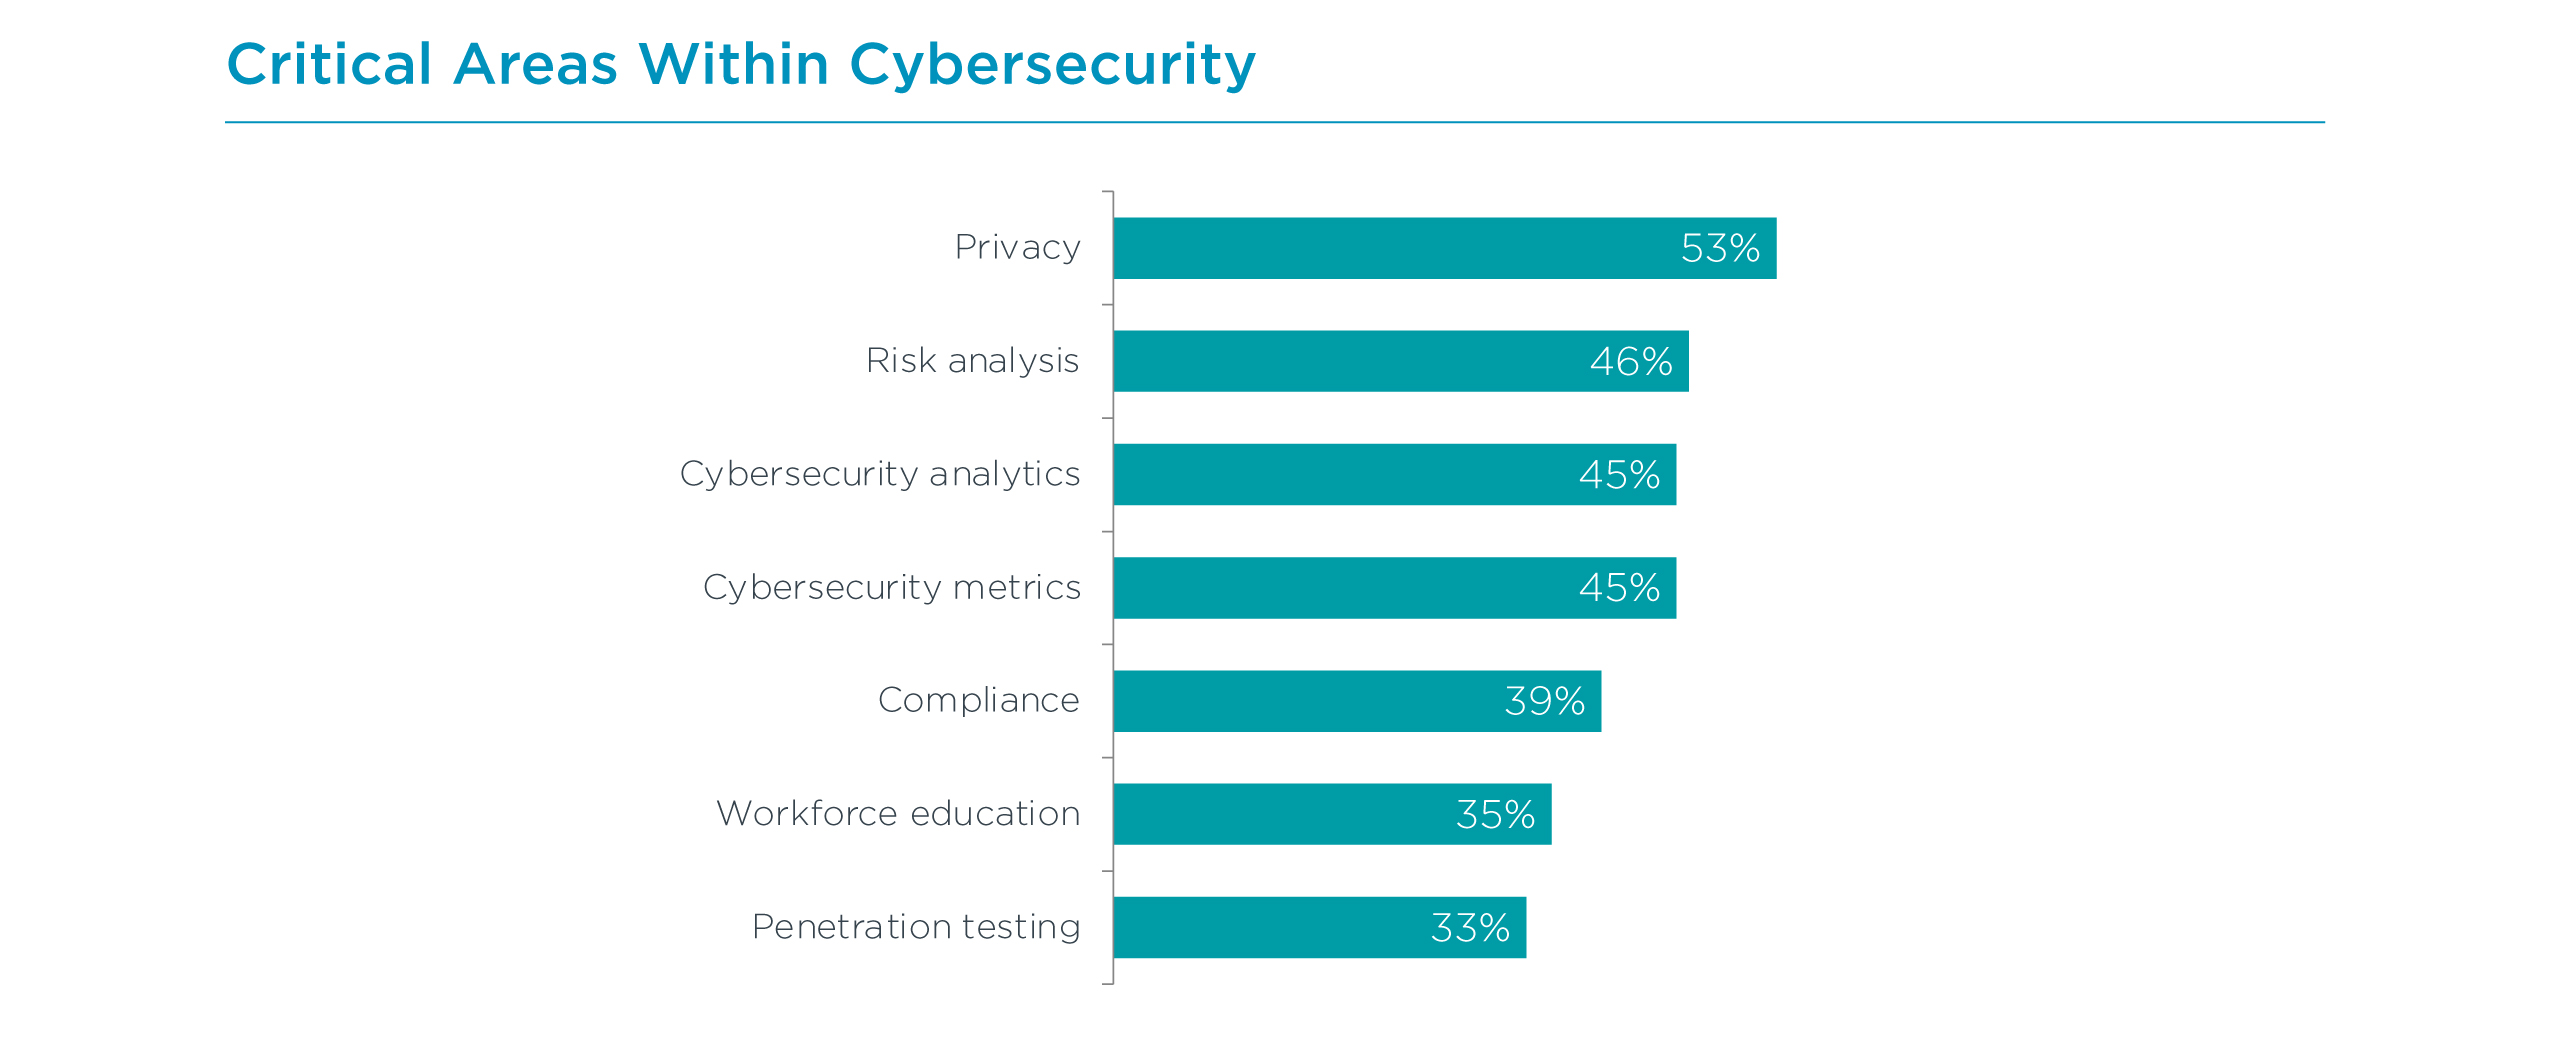 Critical Areas Within Cybersecurity